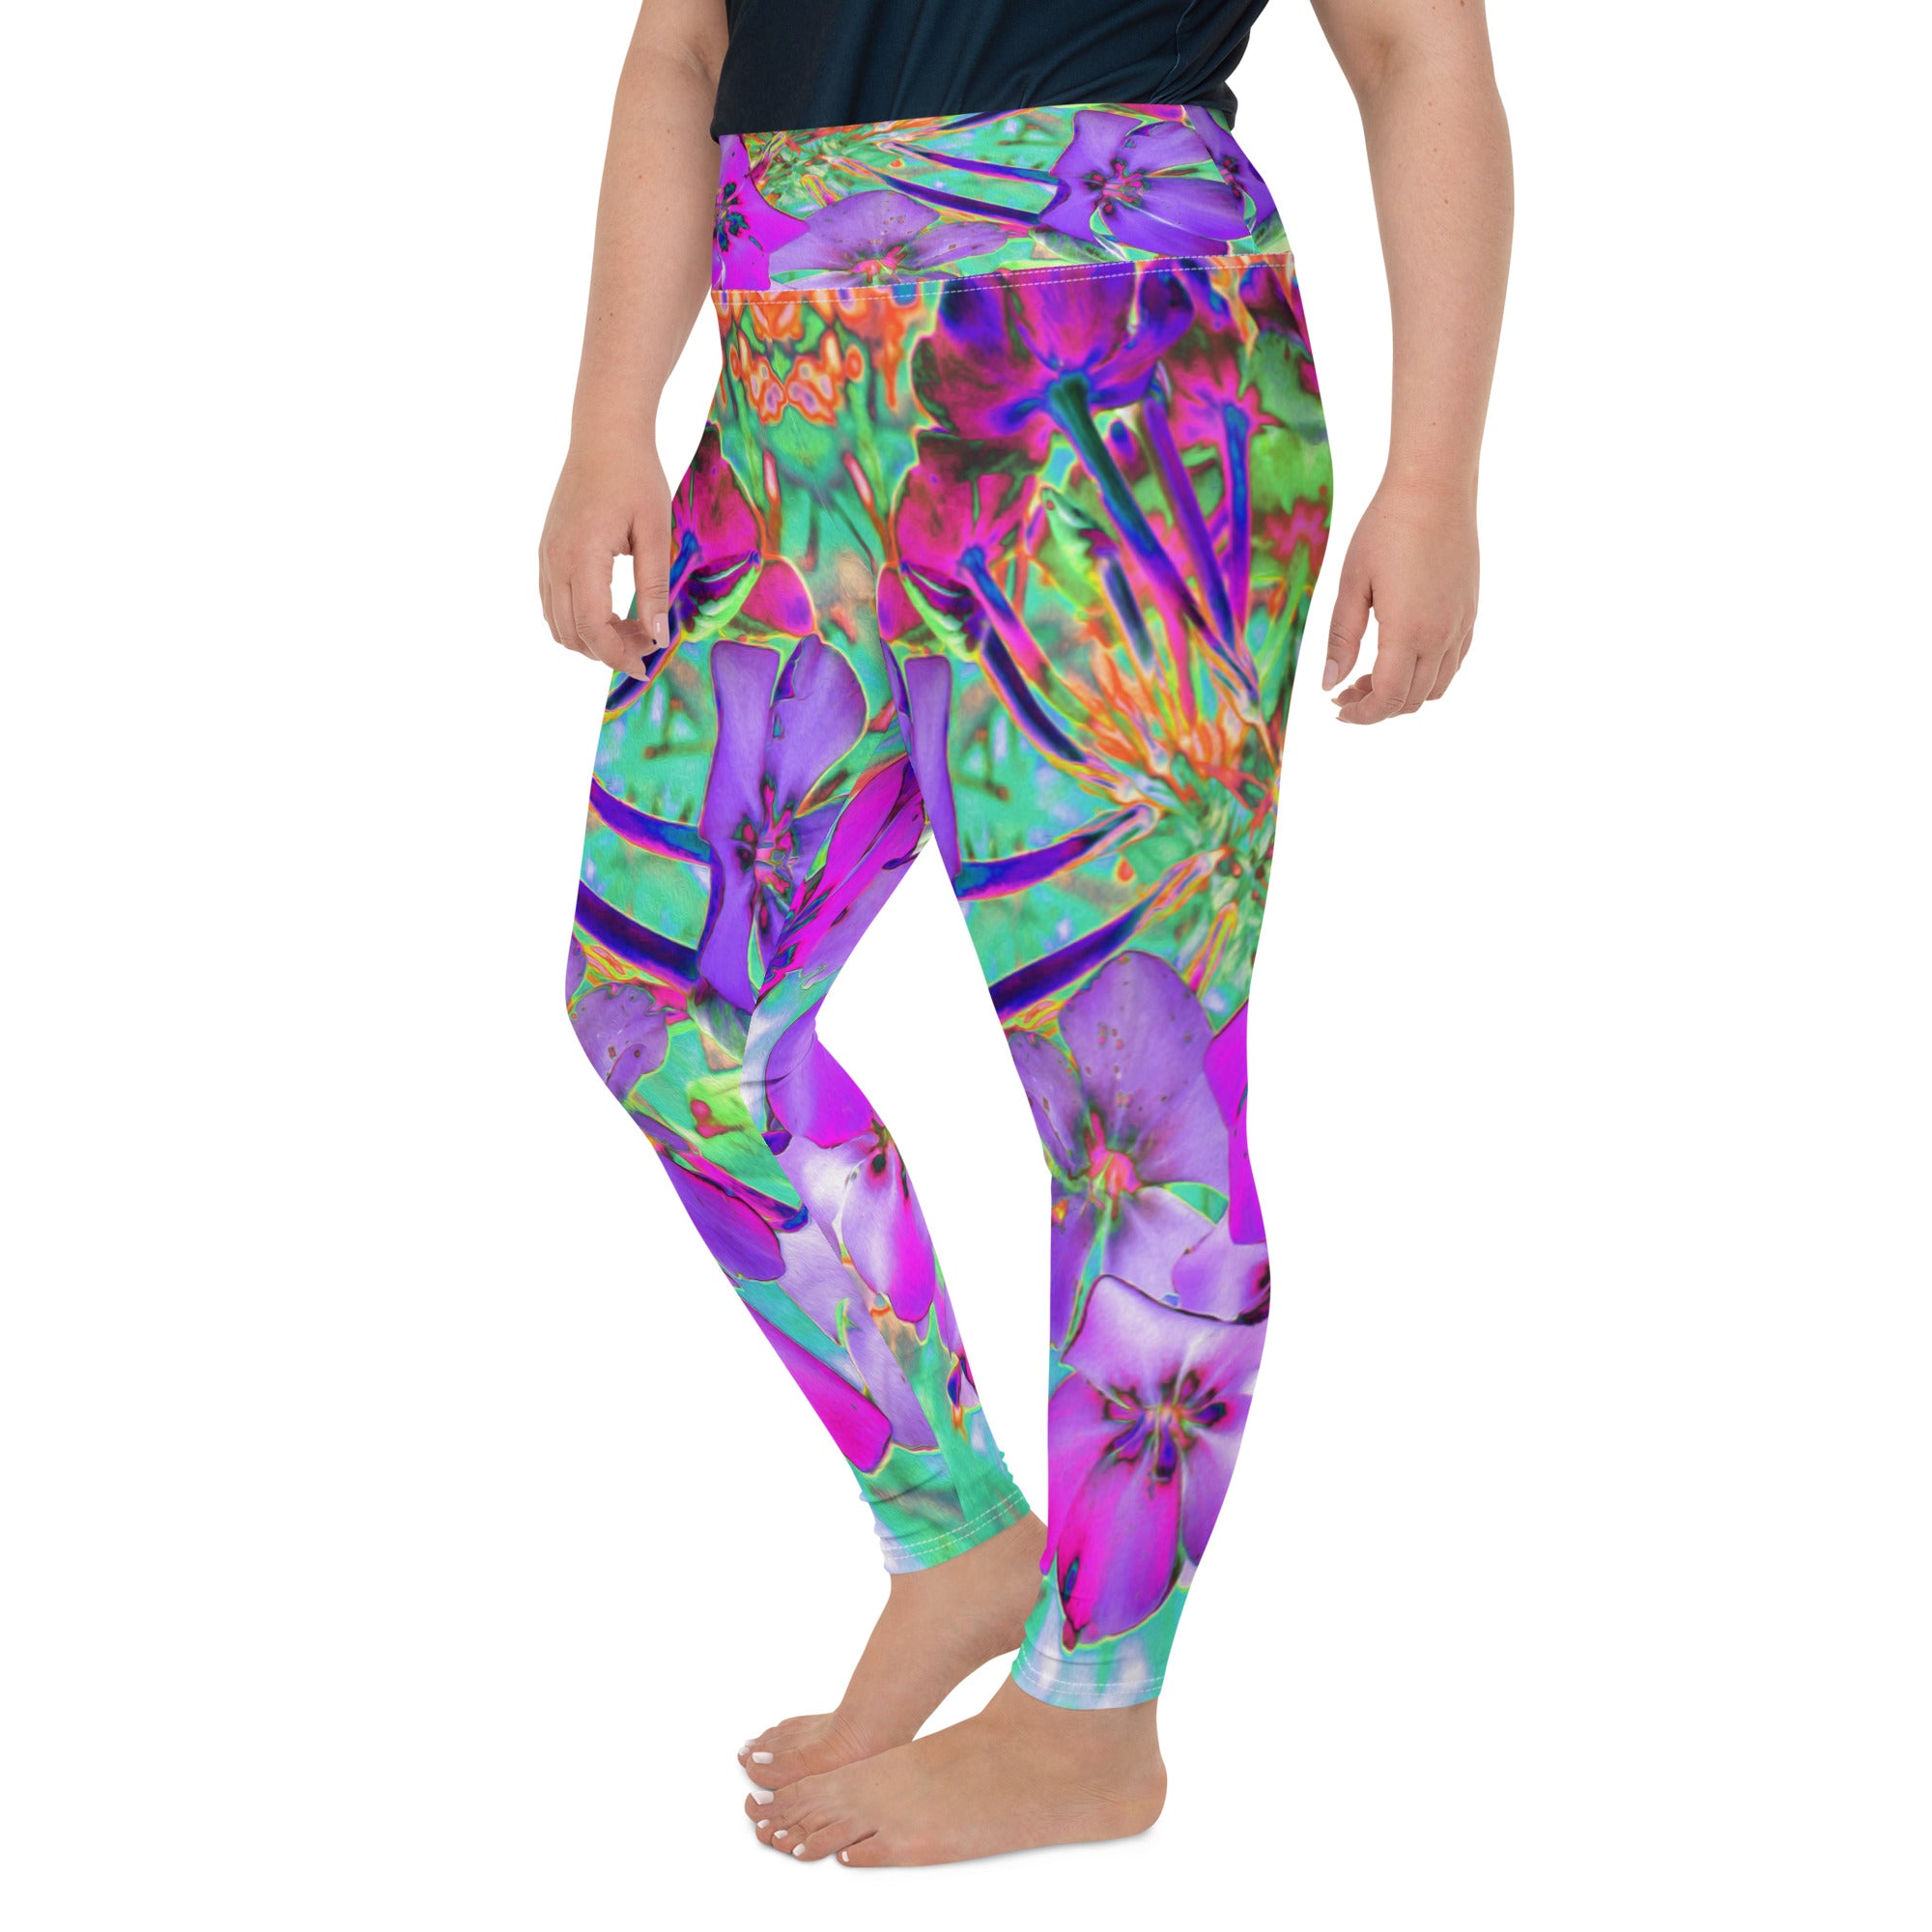 Plus Size Leggings, Dramatic Psychedelic Magenta and Purple Flowers